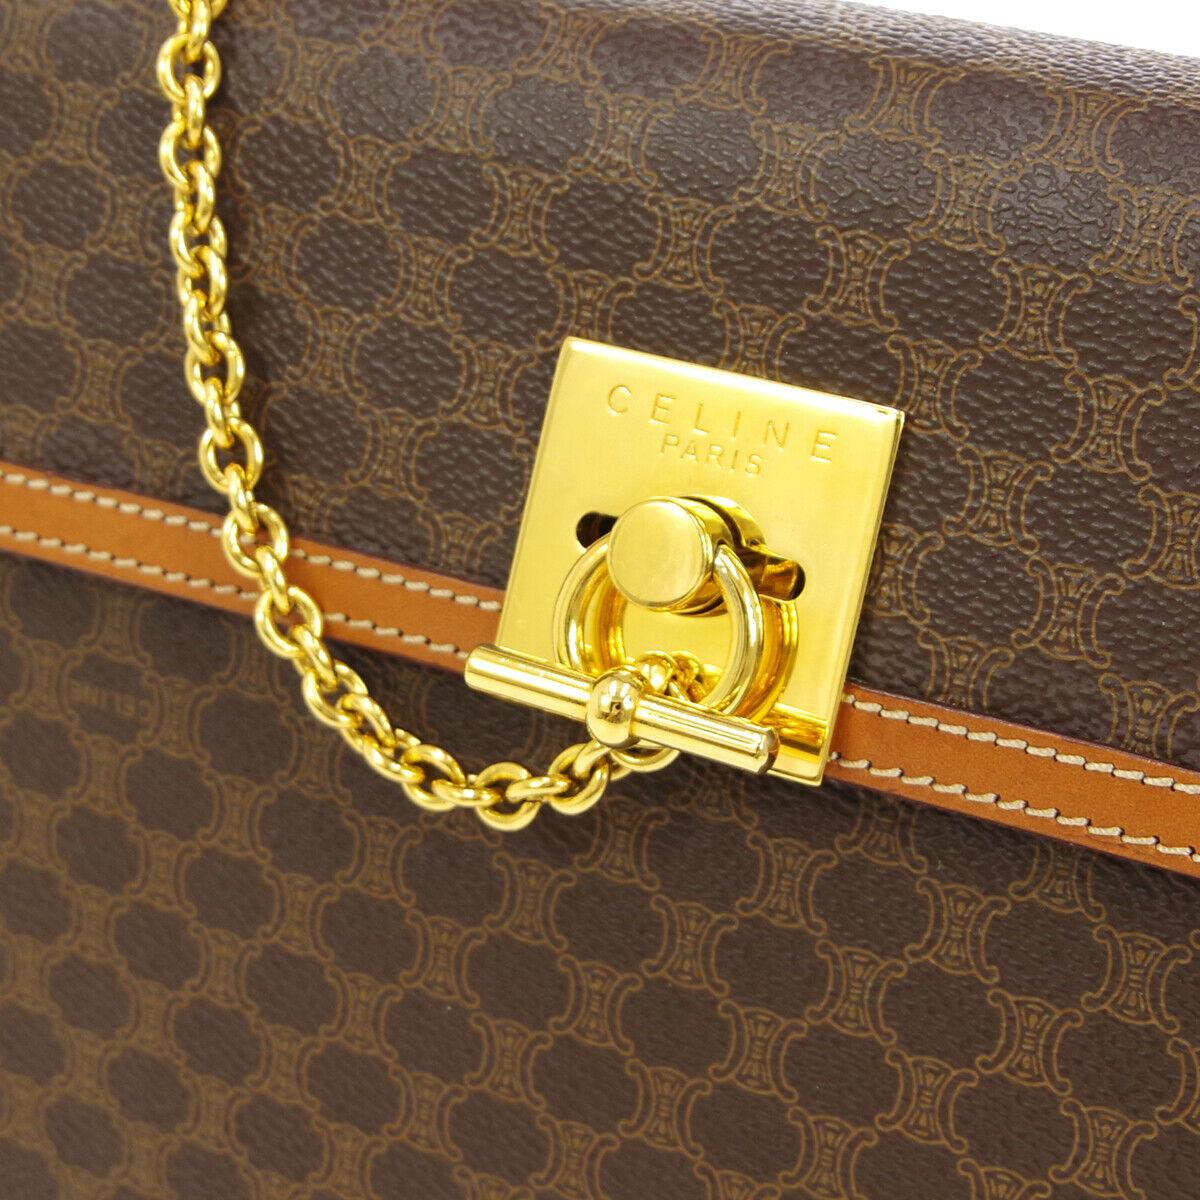 Monogram canvas
Leather
Gold tone hardware
Leather lining
Made in Italy
Top handle 4.75